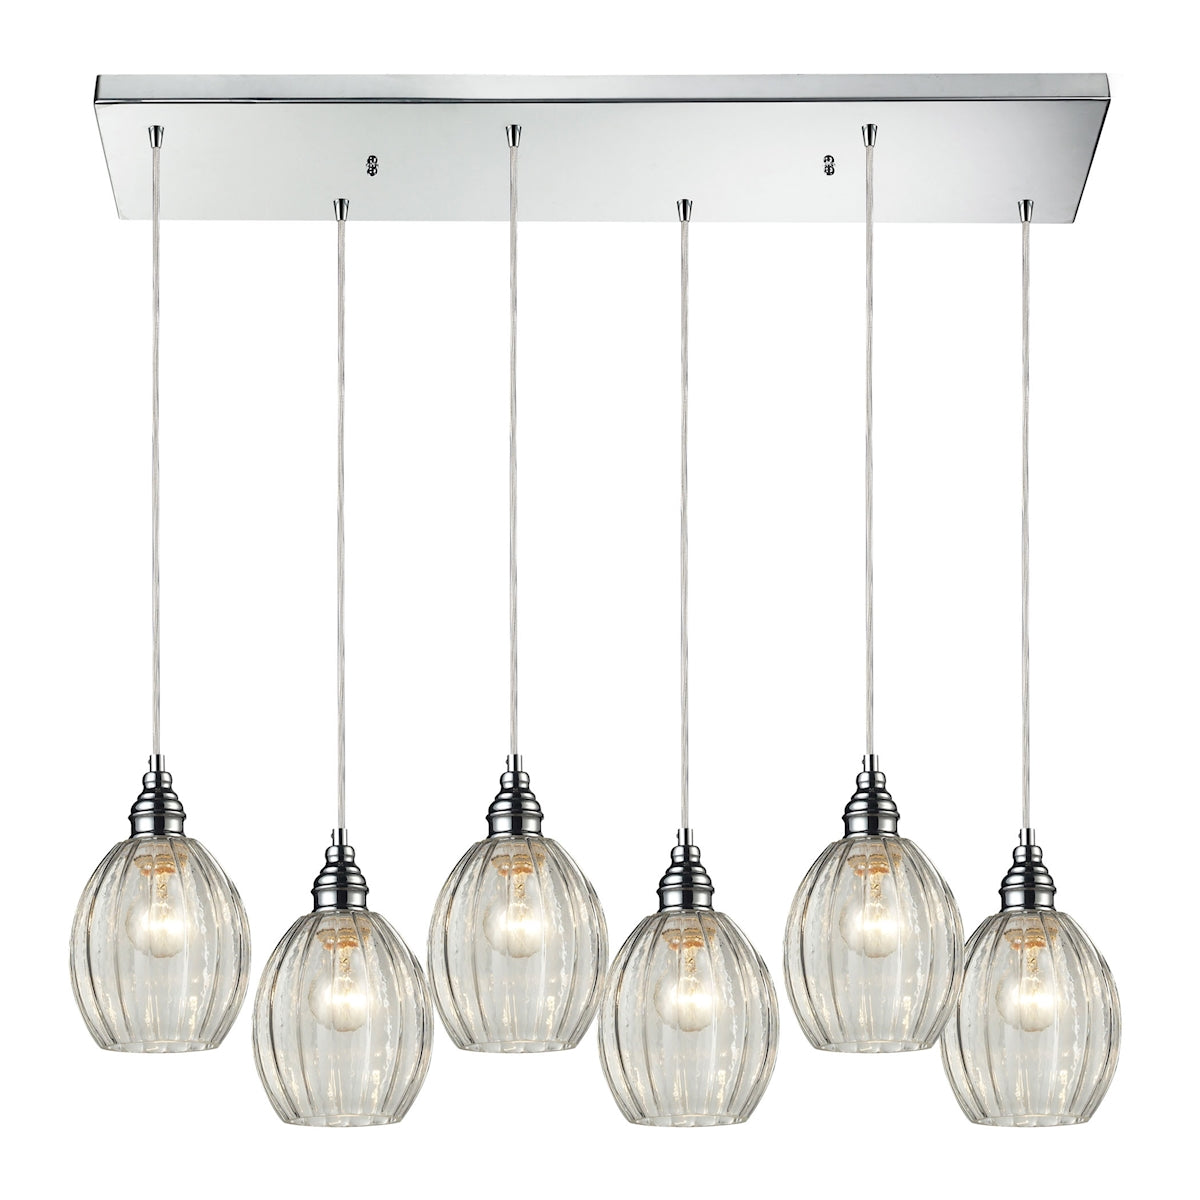 ELK Lighting 46017/6RC - Danica 9" Wide 6-Light Rectangular Pendant Fixture in Polished Chrome with